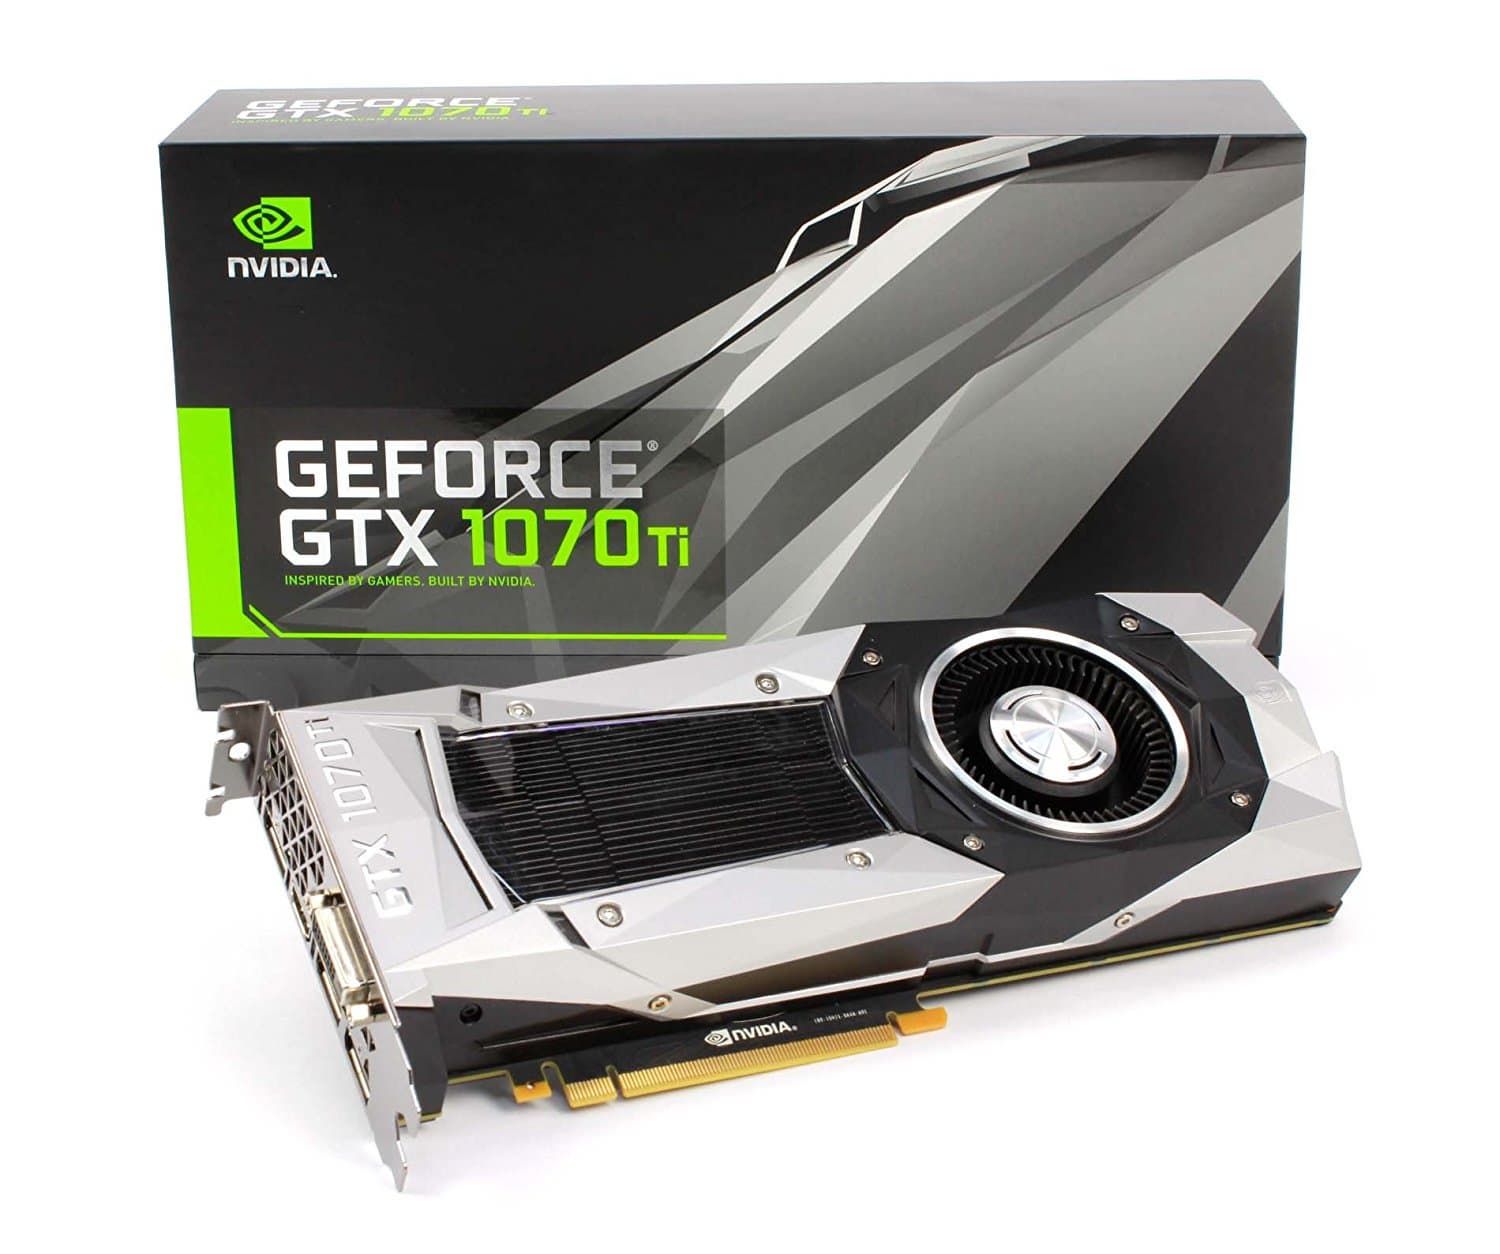 Nvidia GEFORCE GTX 1070 Ti FE Founders Edition Graphics Card